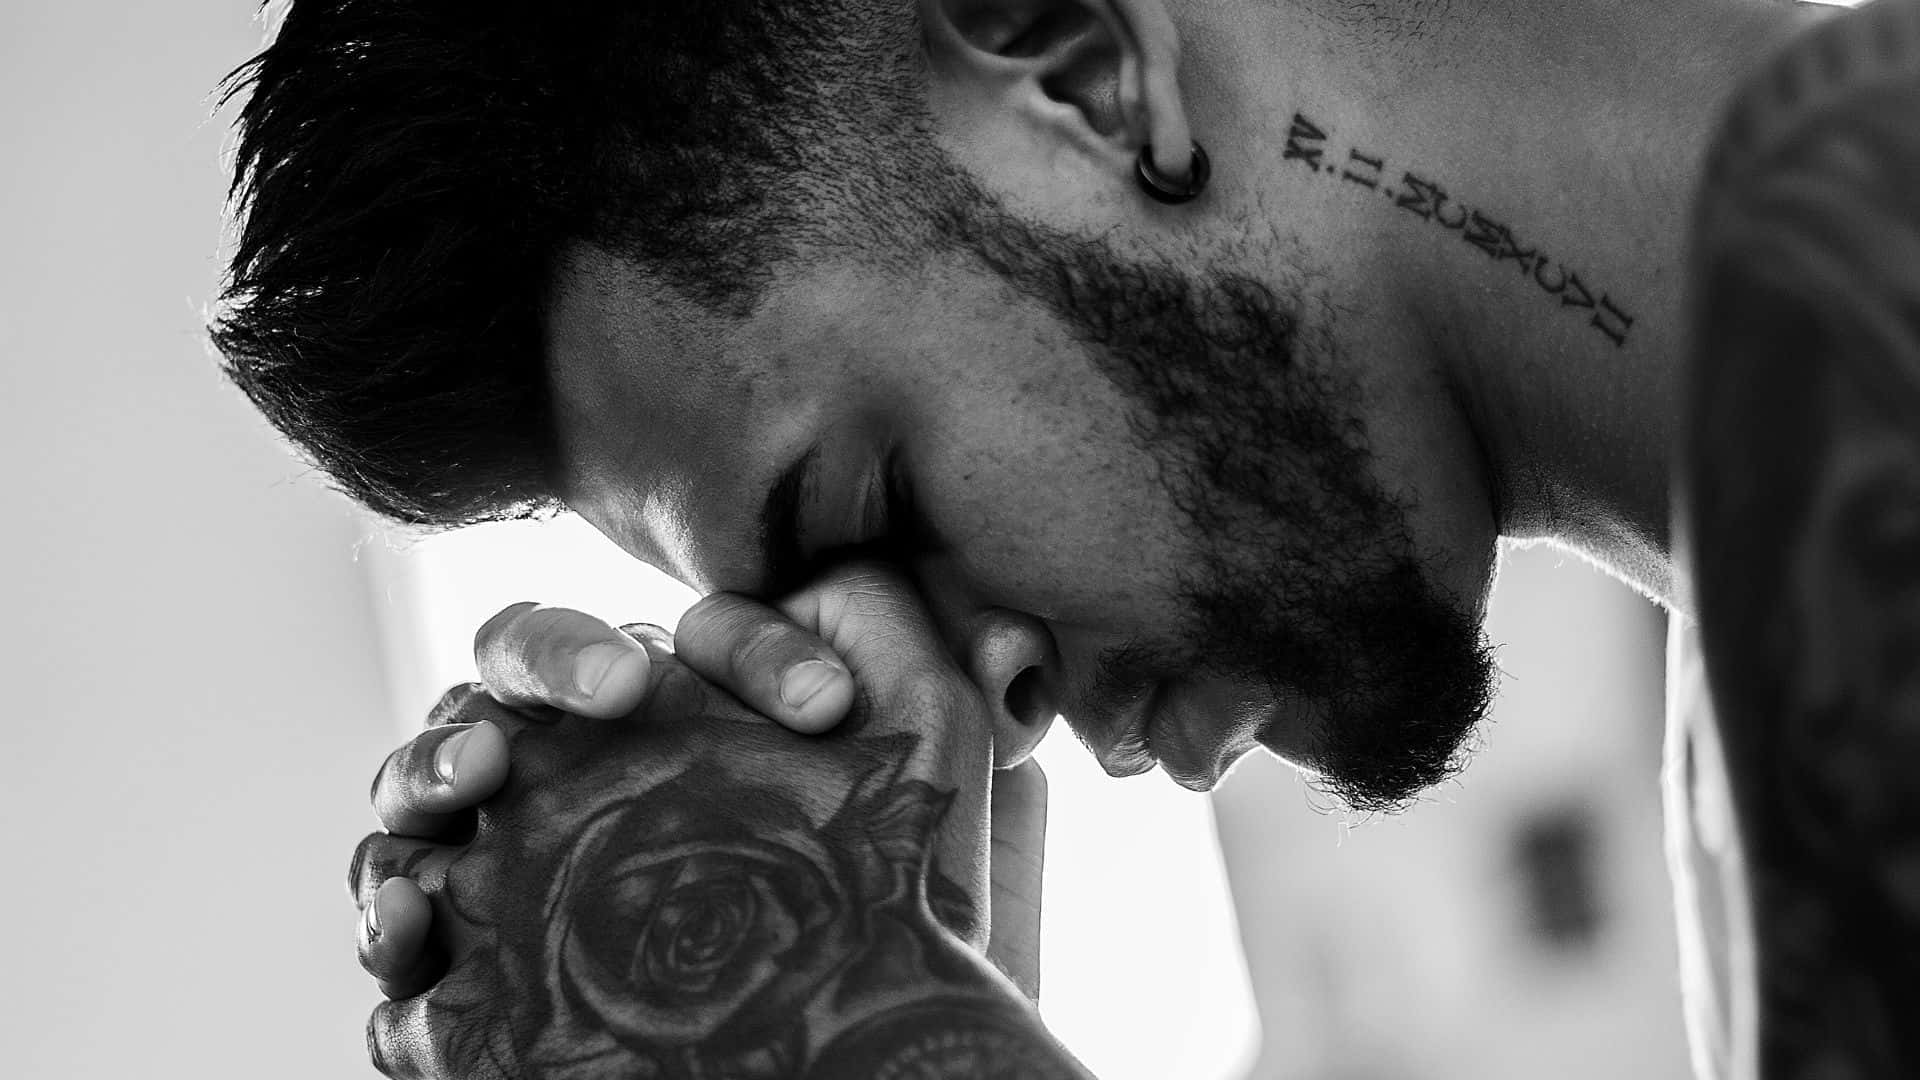 Praying Man With A Hand Tattoo Wallpaper